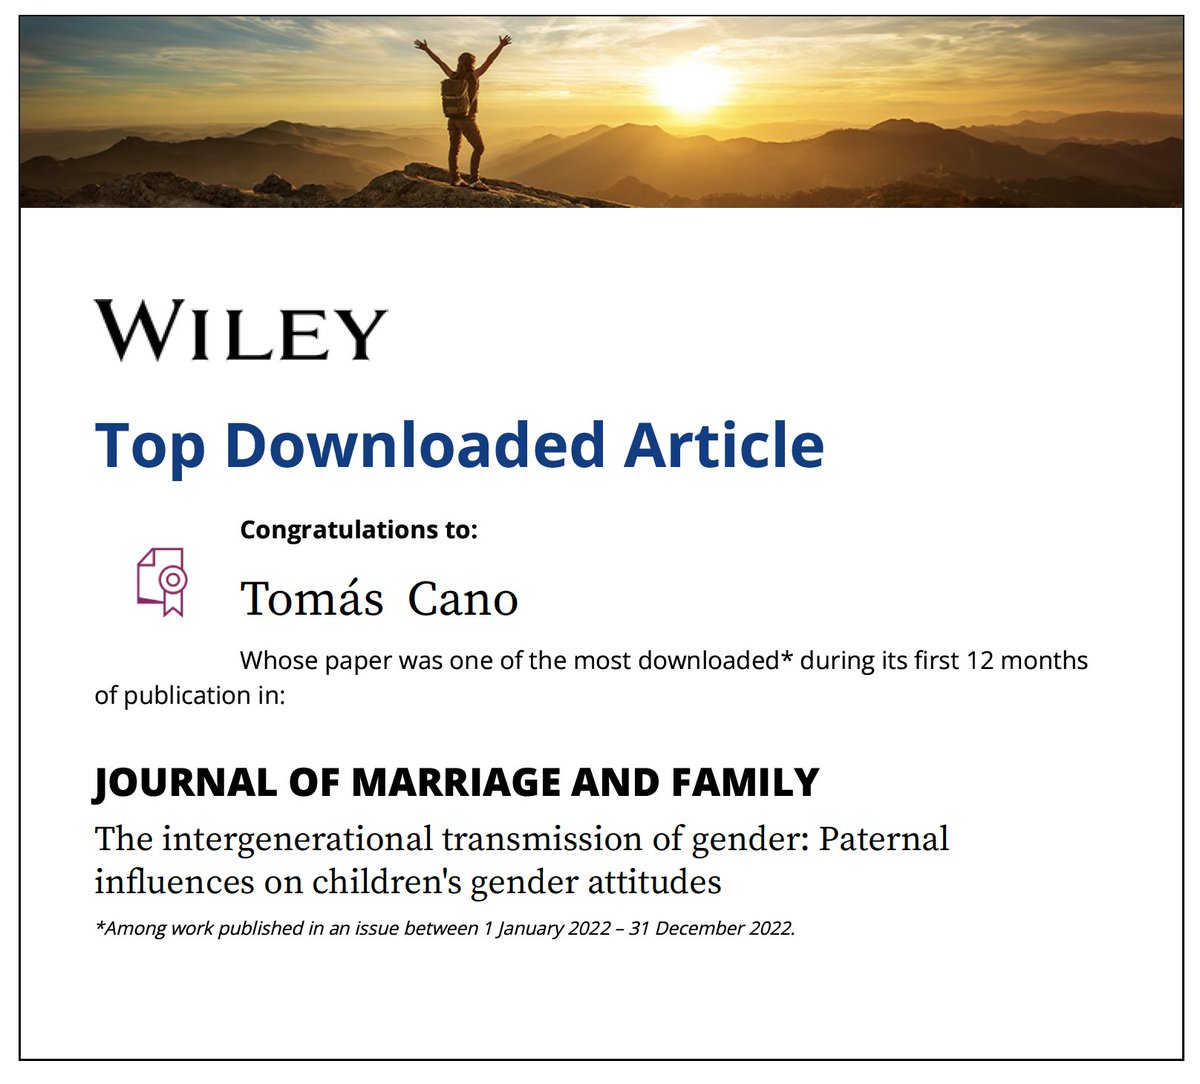 There's actually people reading our work. Thank you 🙏 The article can be downloaded for free here: onlinelibrary.wiley.com/doi/full/10.11…